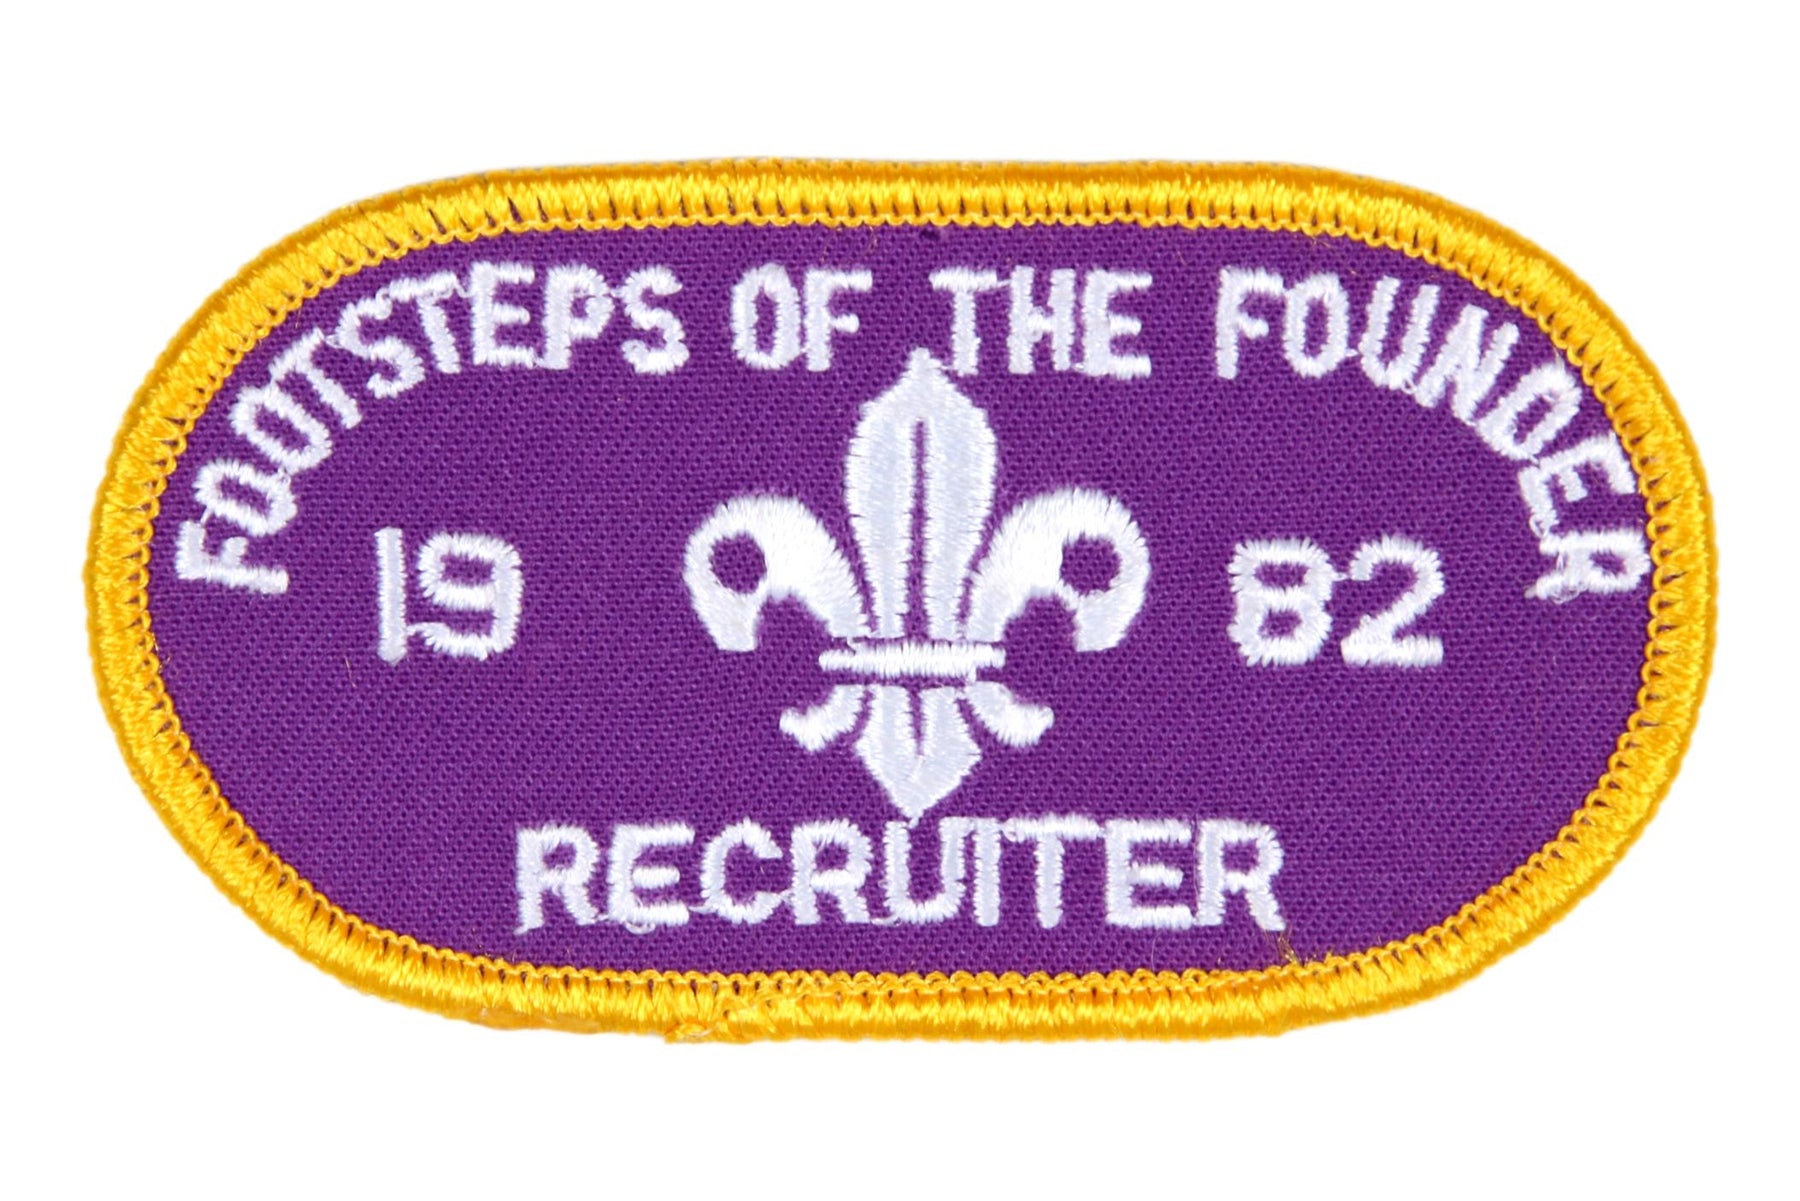 Recruiter Patch 1982